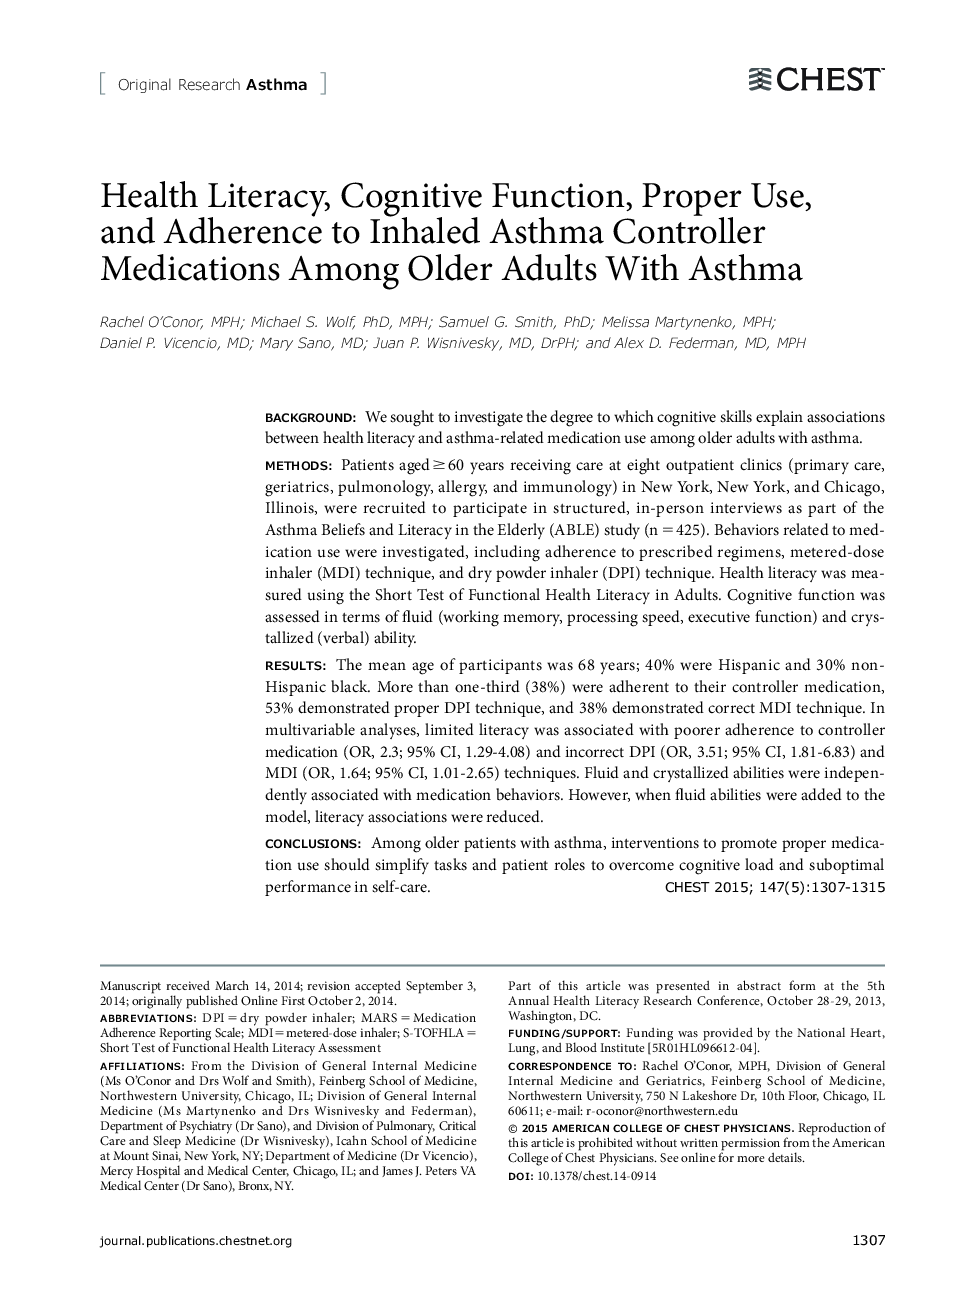 Health Literacy, Cognitive Function, Proper Use, and Adherence to Inhaled Asthma Controller Medications Among Older Adults With Asthma